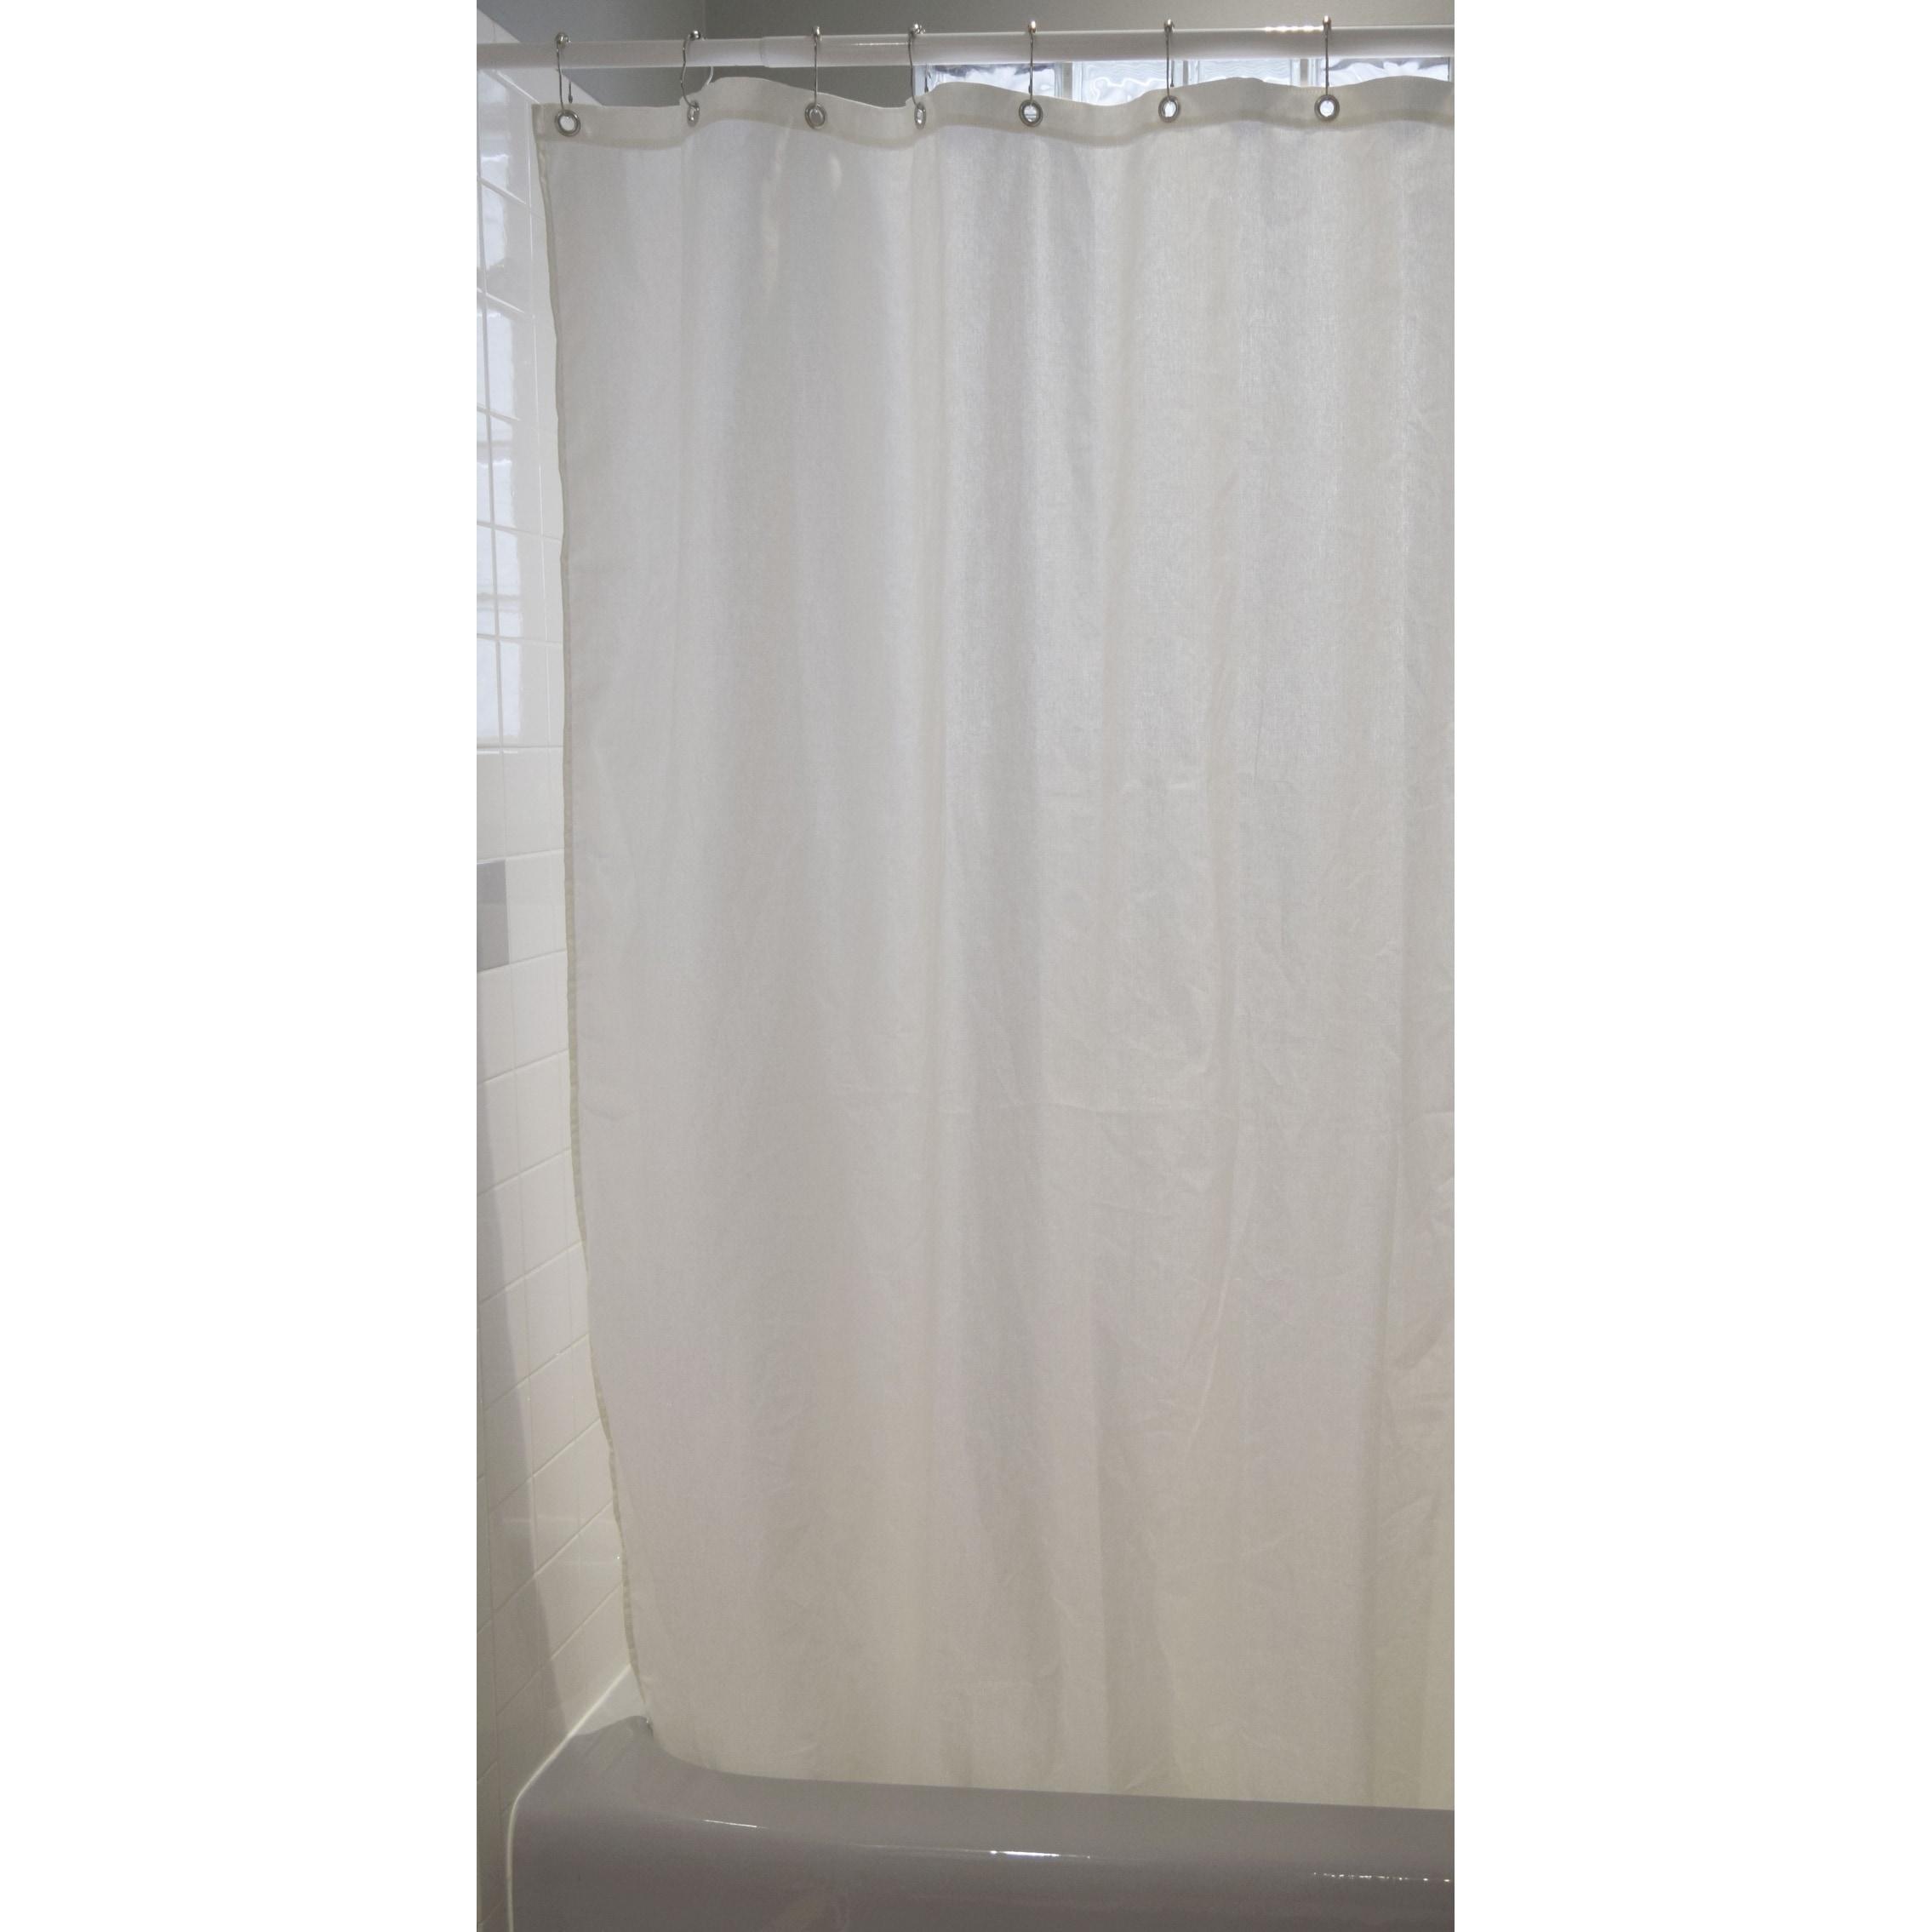 36 inch shower curtain rods tension